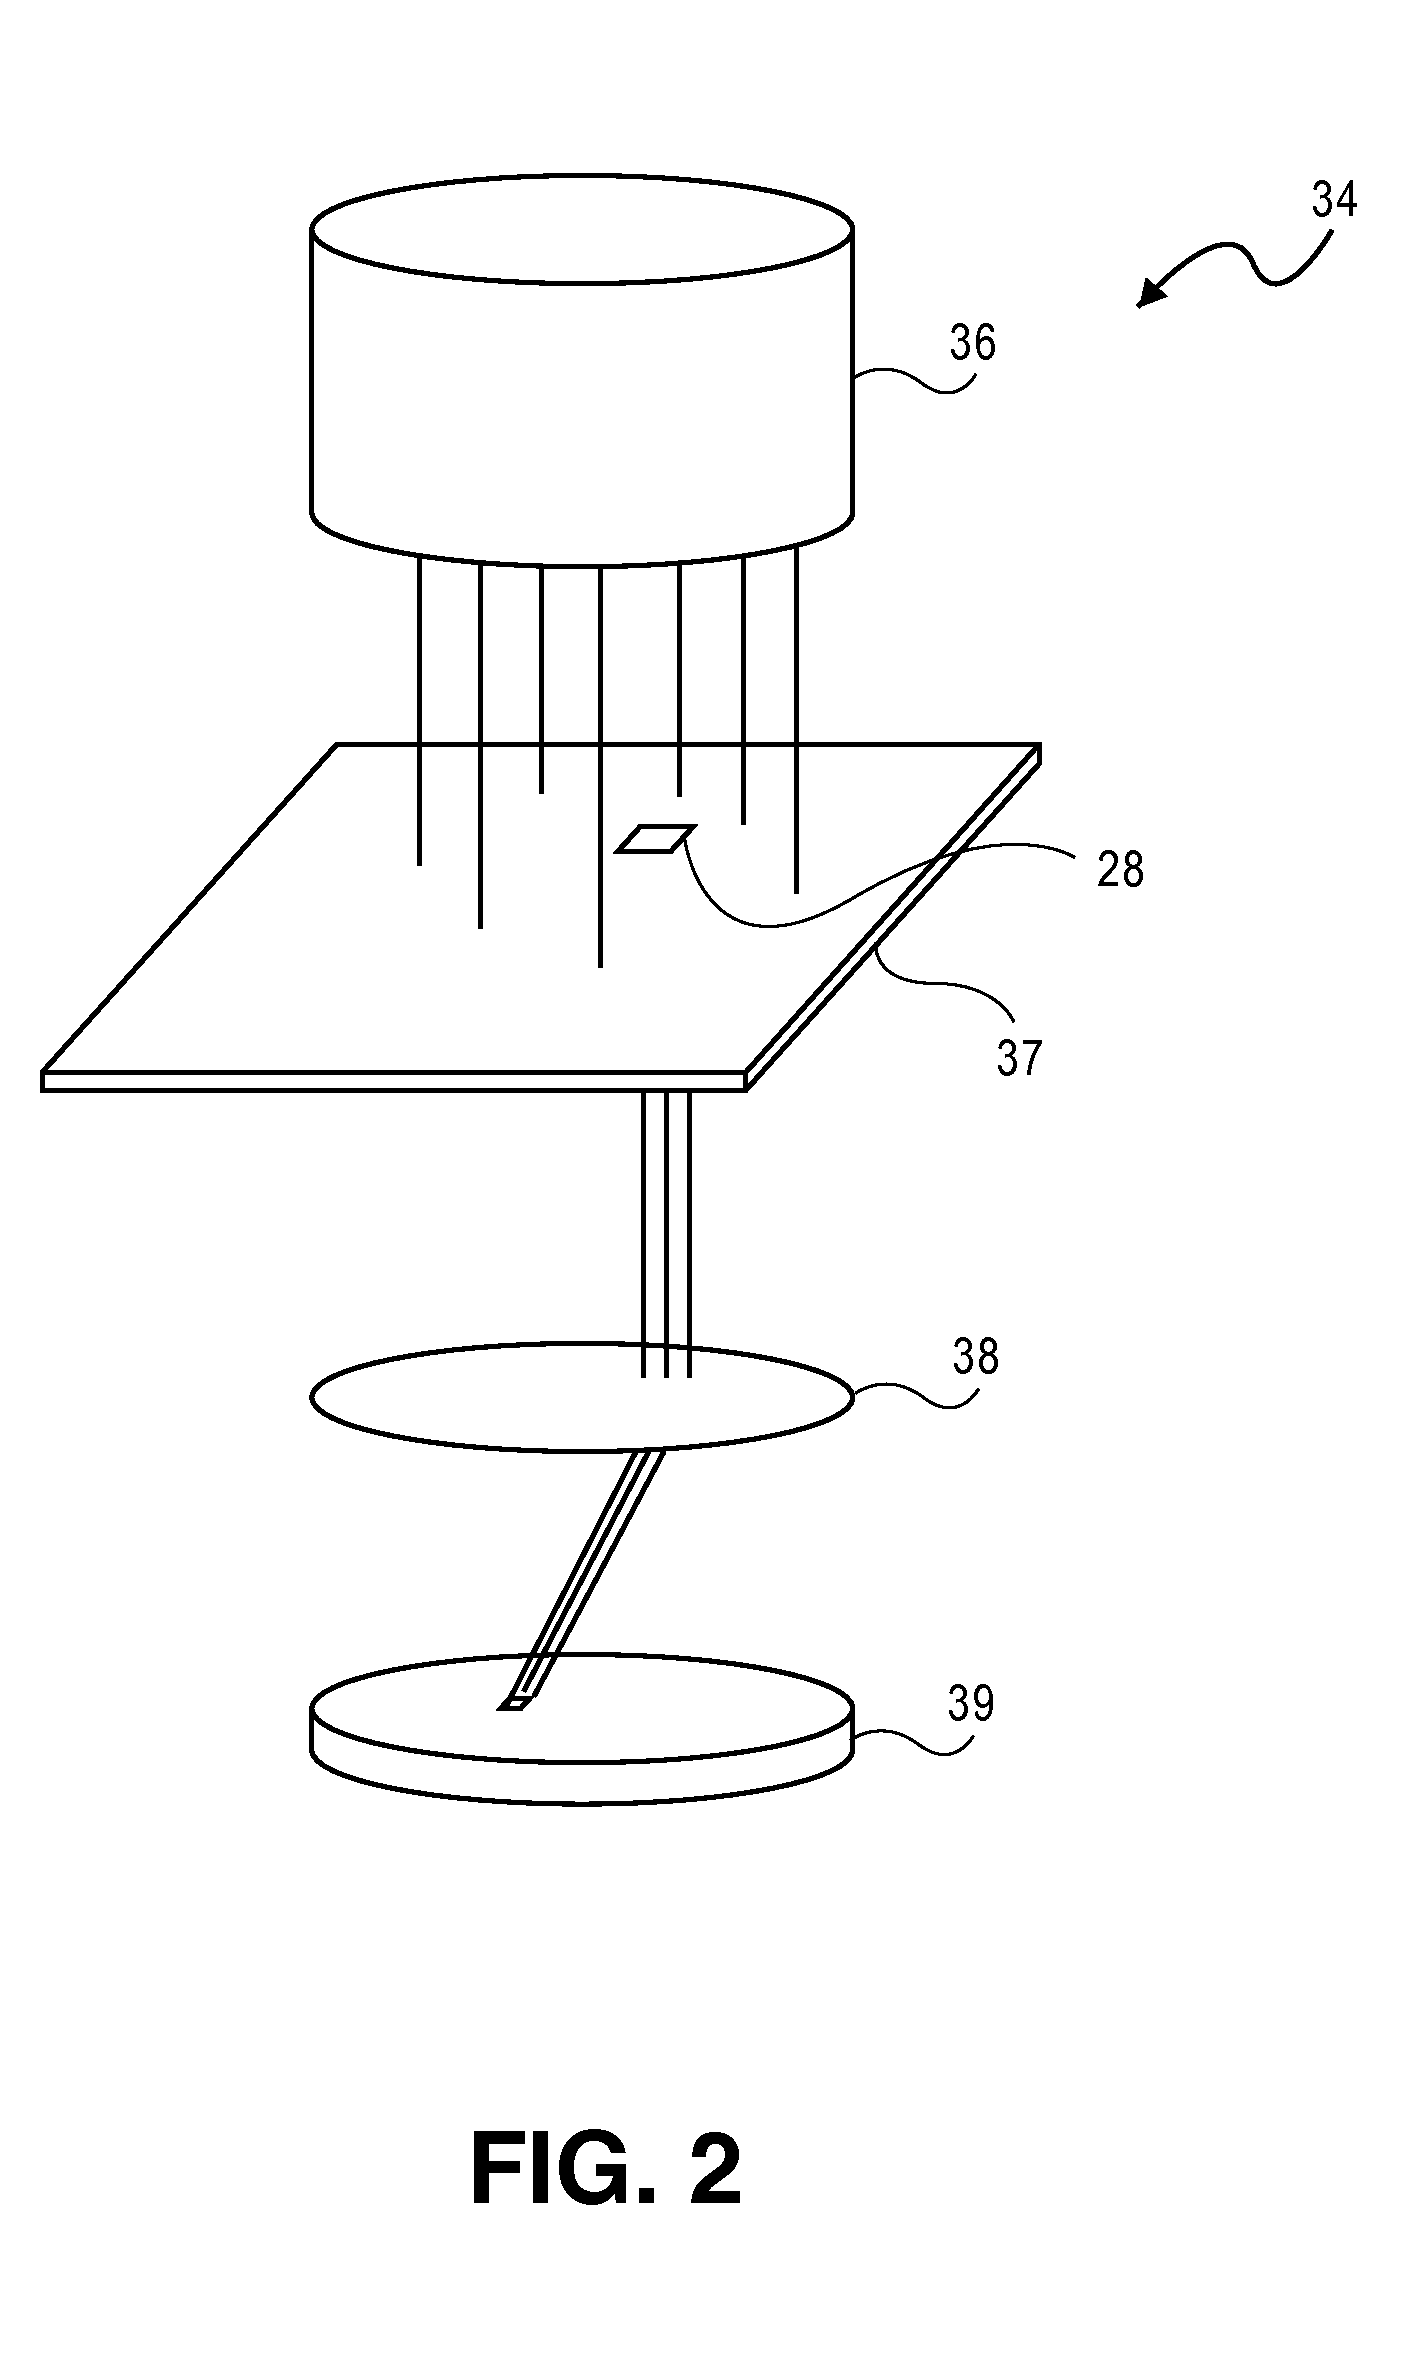 Method for manufacturing a surface and integrated circuit using variable shaped beam lithography